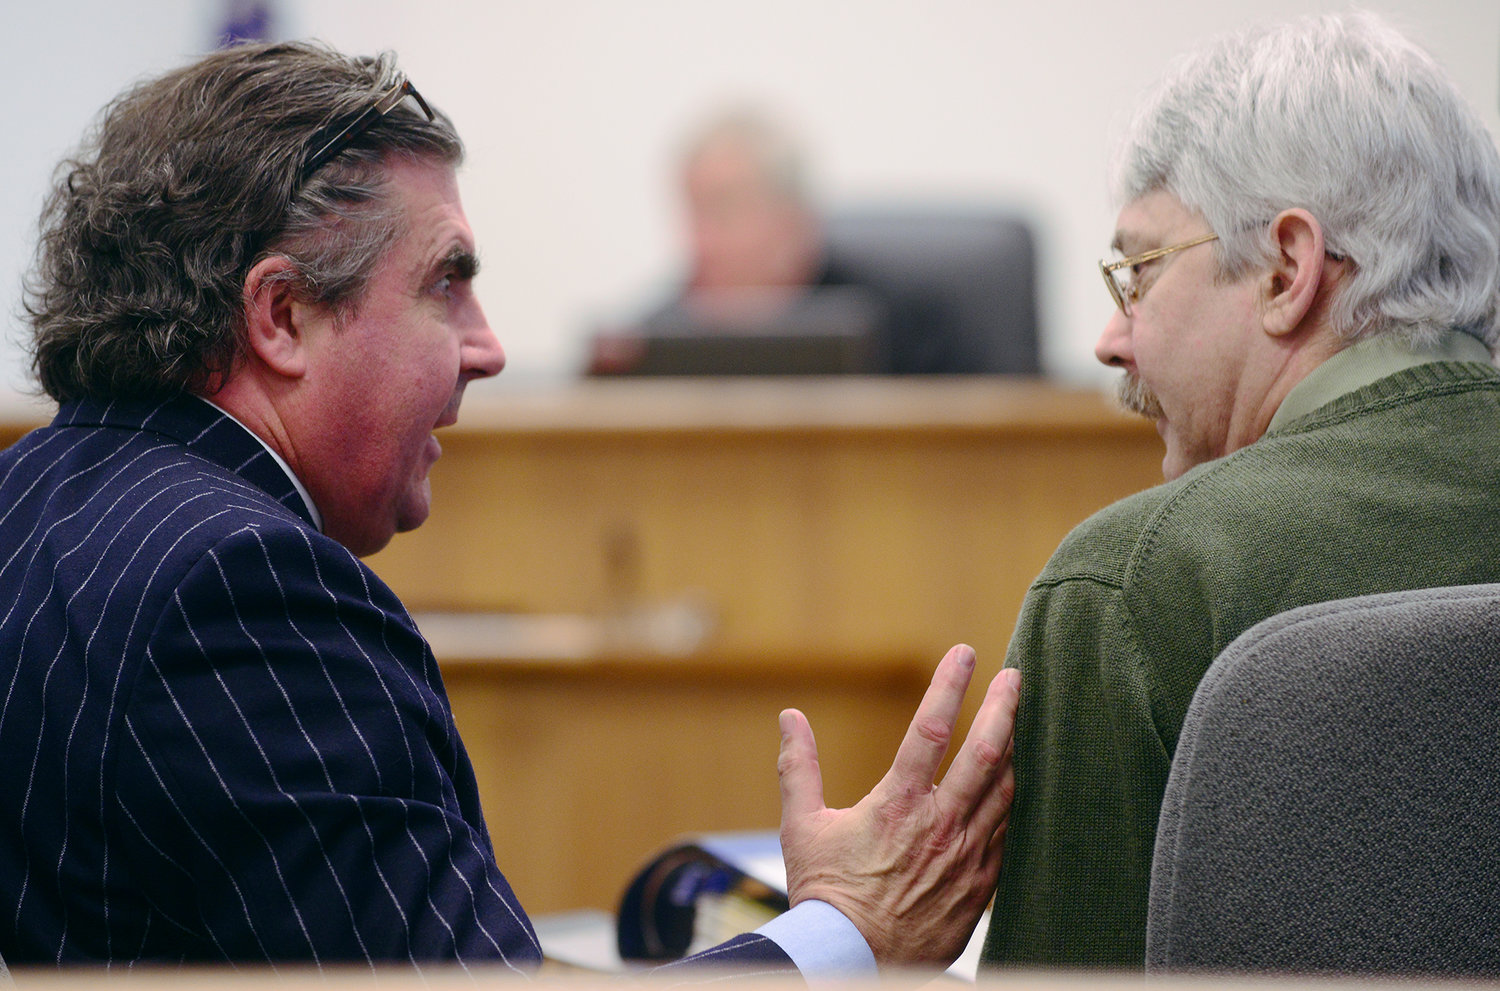 Defense attorney John Crowley, talks to his client, Rick Riffe, right, during a recess in Riffe's double-homicide trial in Lewis County Superior Court on Thursday afternoon at the Lewis County Law and Justice Center in Chehalis.